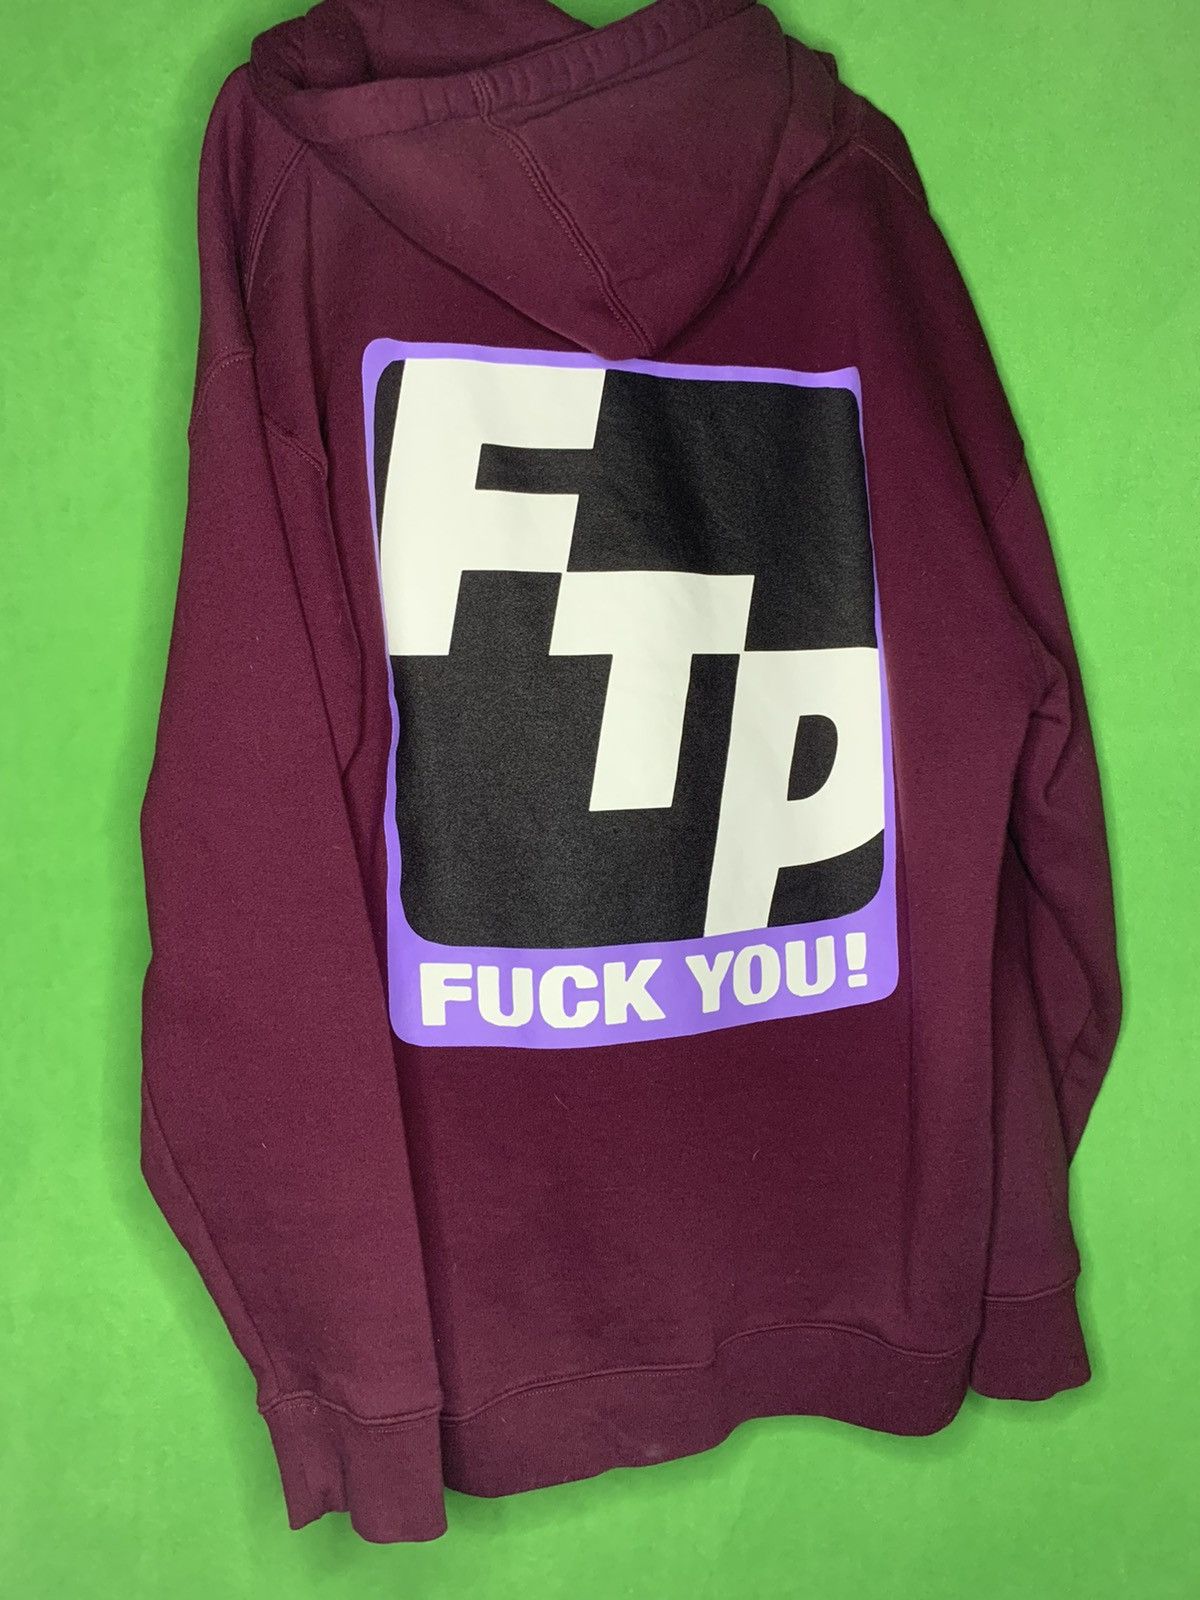 Fuck The Population FTP FUCK YOU Hoodie XL Size US XL / EU 56 / 4 - 2 Preview